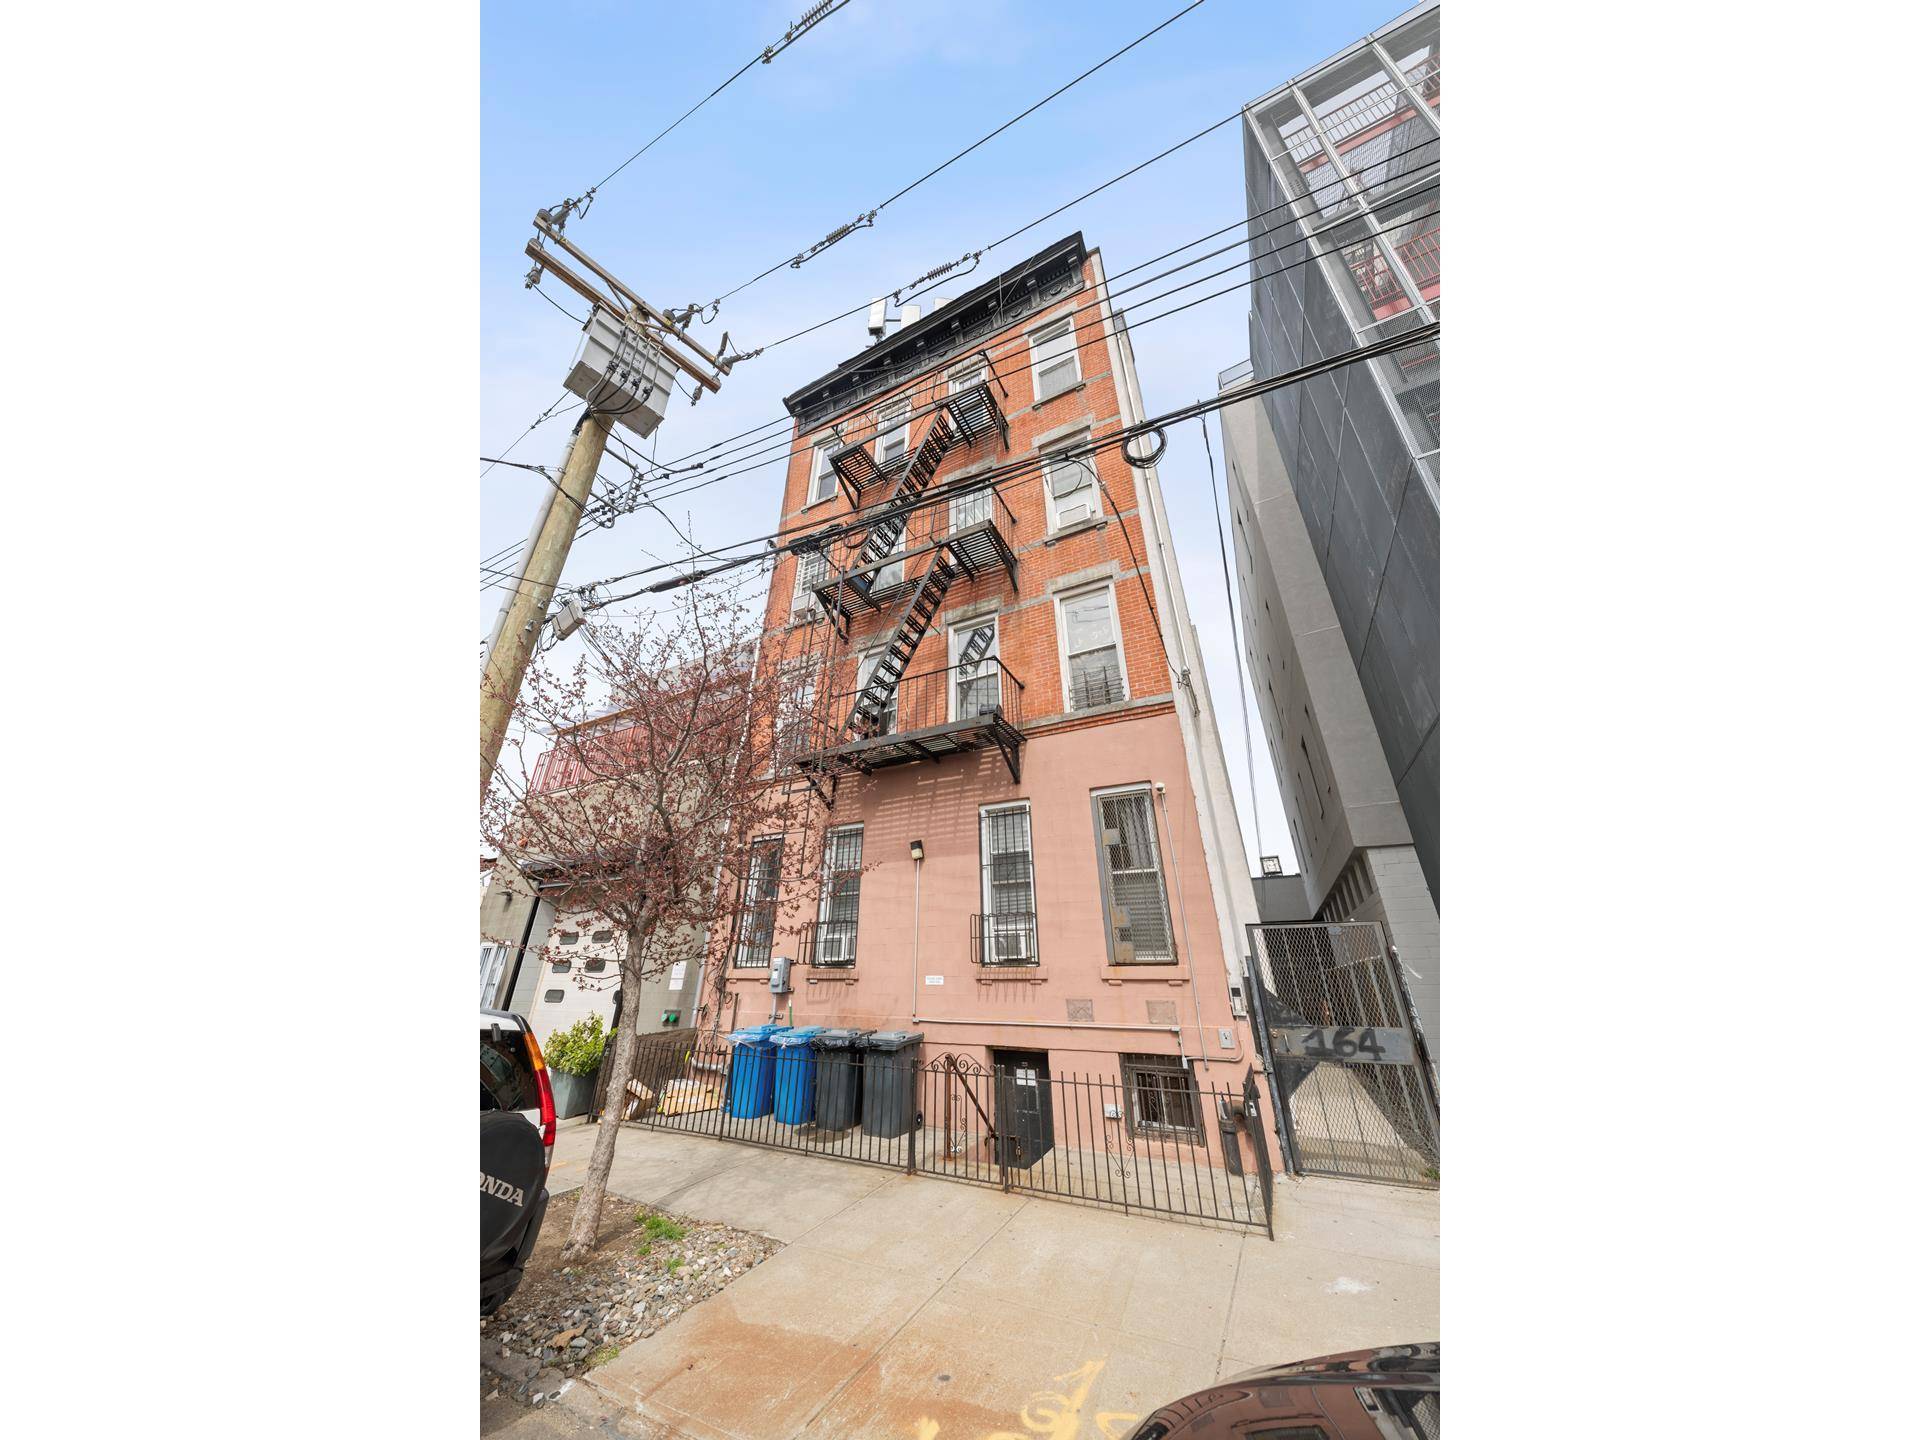 164 Dikeman Street is a 5, 500 square foot, eight unit, four story masonry building located between Conover Street and Ferris Street in prime Red Hook, Brooklyn.